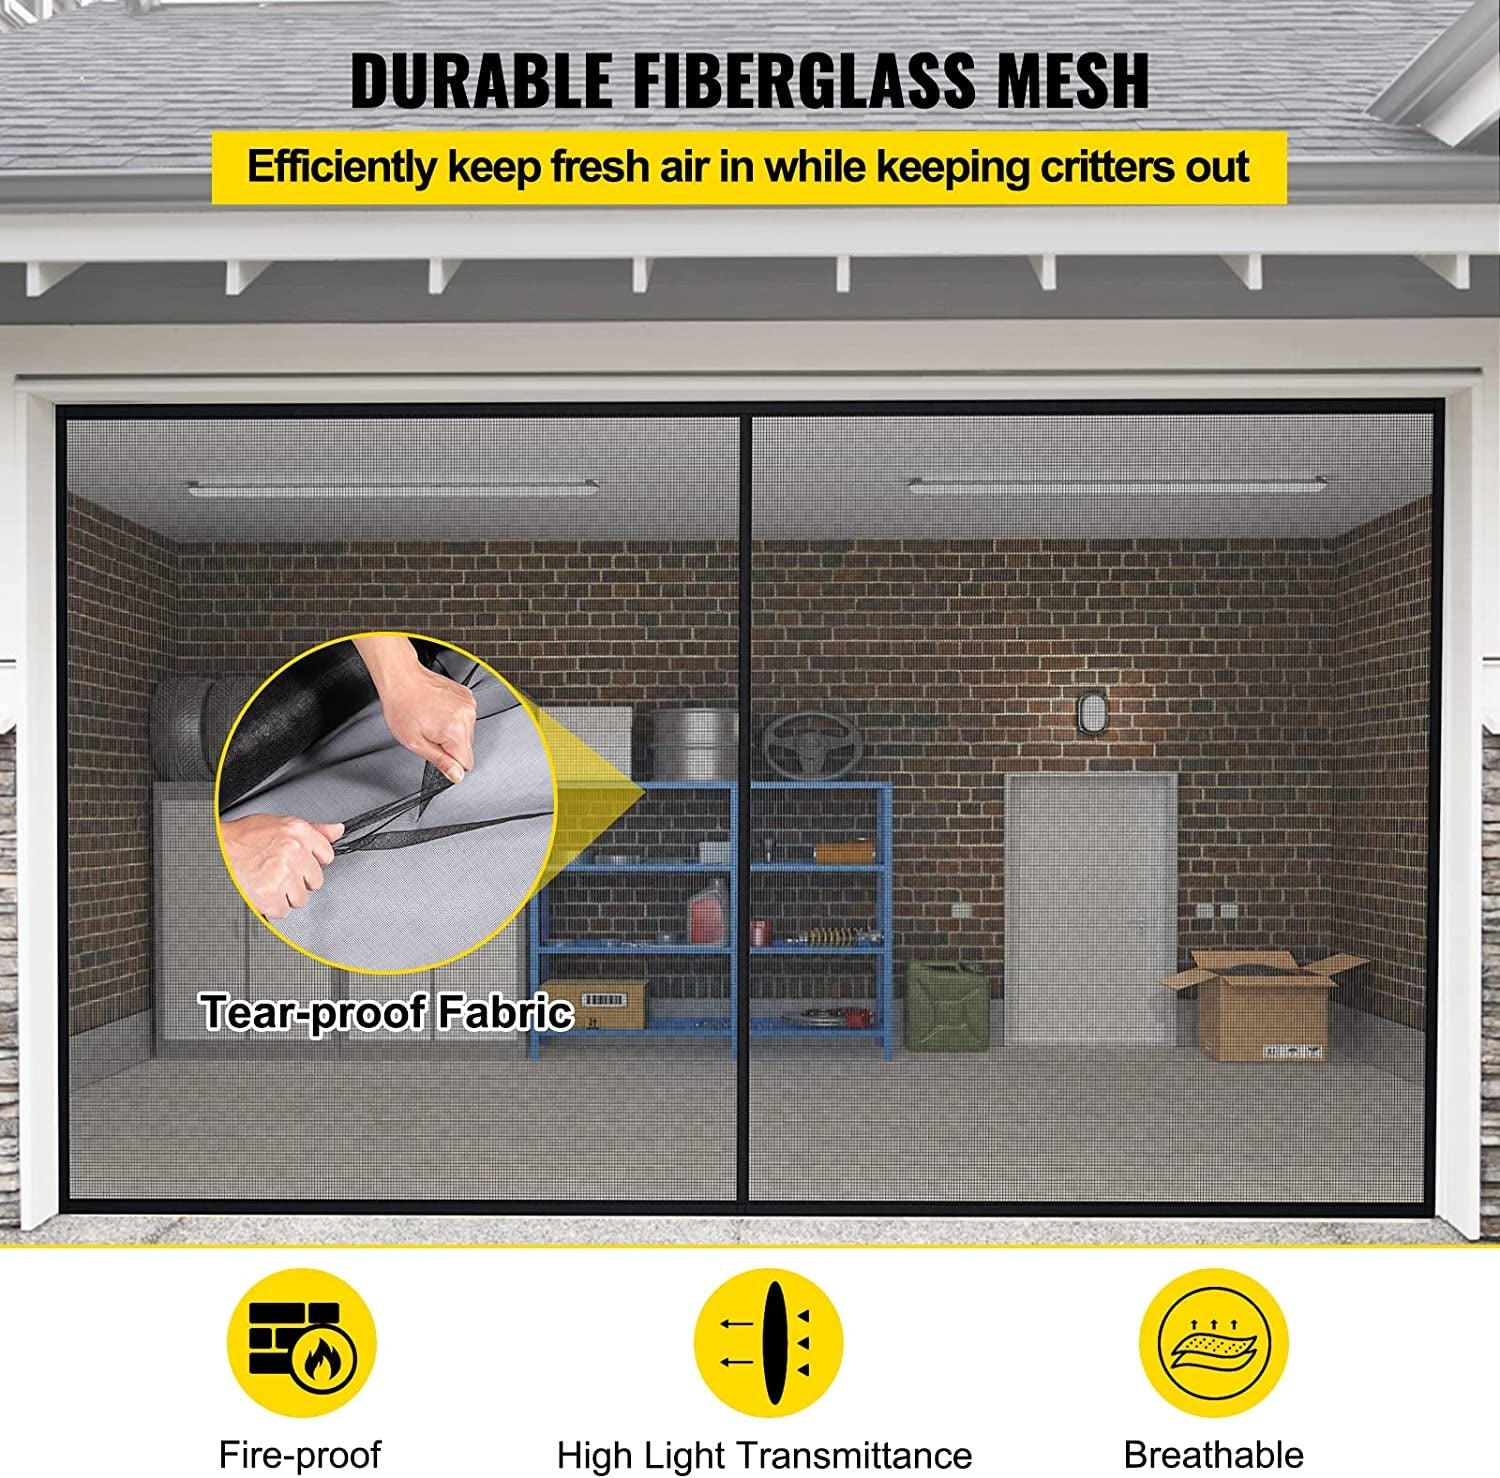 Garage Door Screen, 16 X 7 Ft for 2 Cars, 5.2 Lbs Heavy-Duty Fiberglass Mesh for Quick Entry with Self Sealing Magnet and Weighted Bottom, Kids / Pets Friendly, Easy to Install and Retractable - b13c4ef4-e9aa-49d7-93ba-5c9e9f049549-Quality Home Distribution